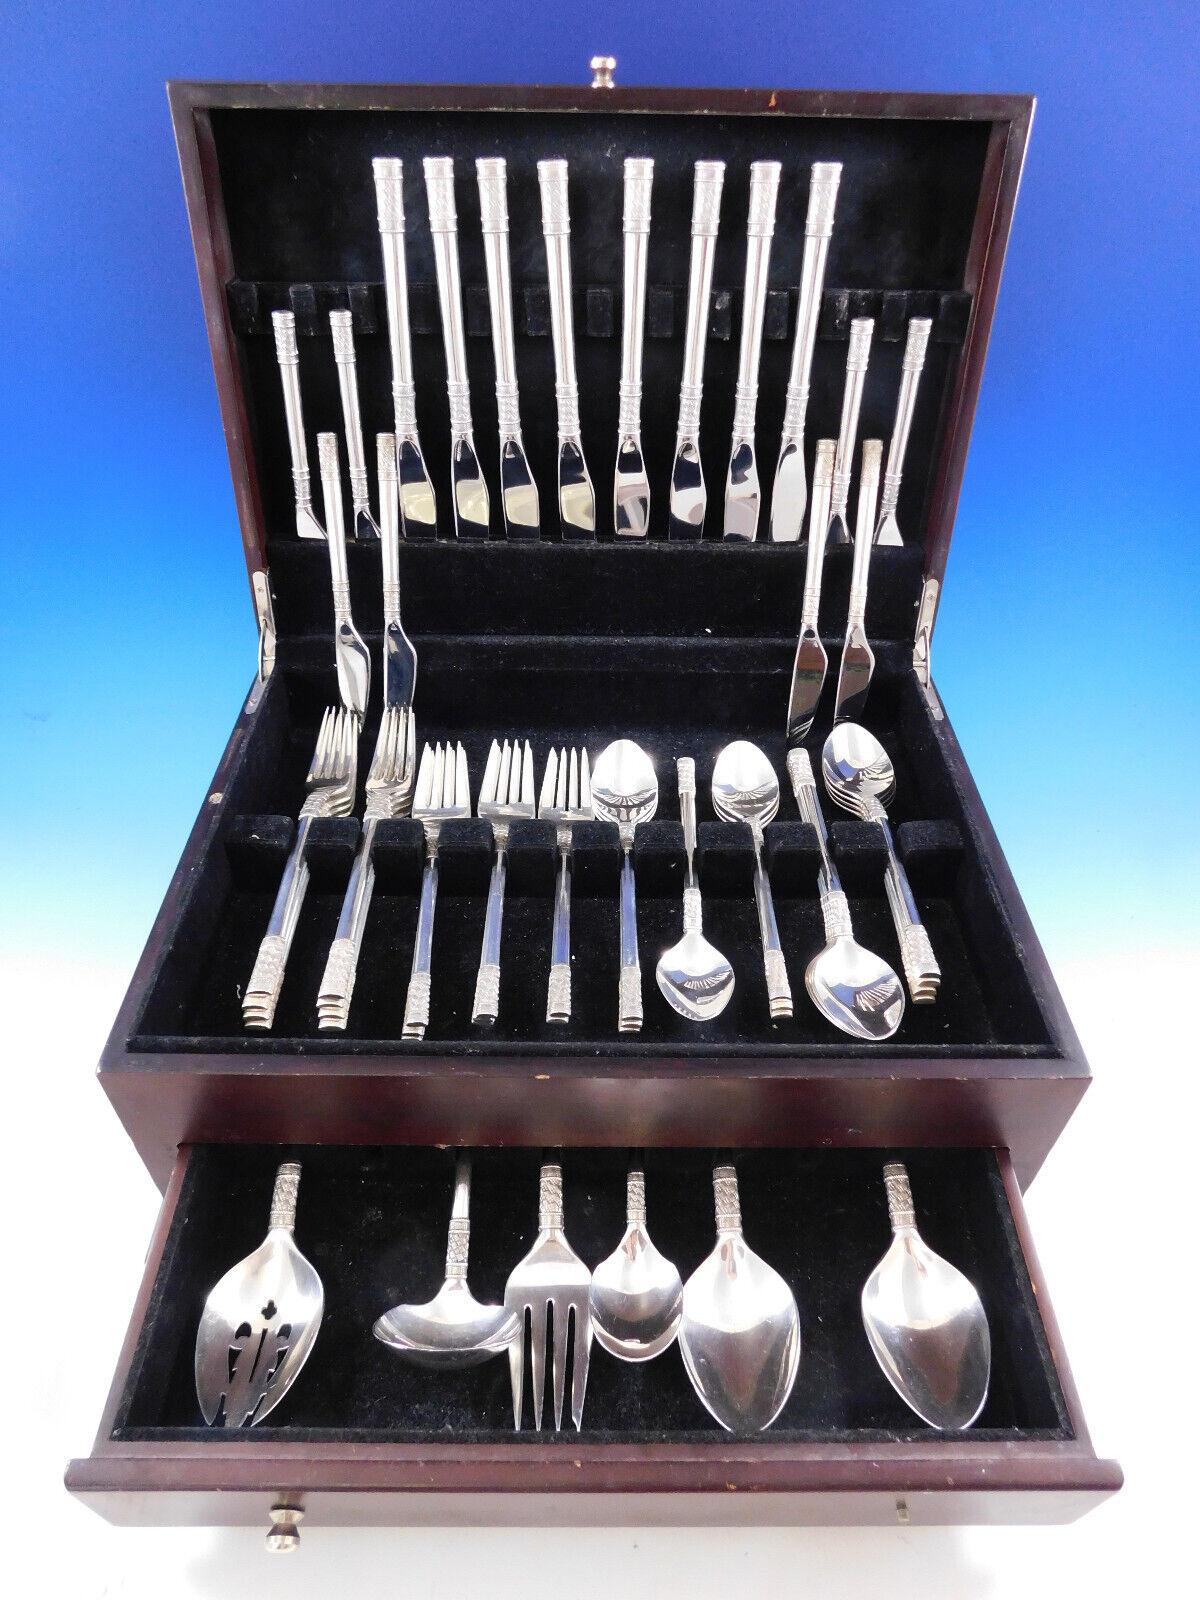 Gorgeous Aegean weave by Wallace sterling silver flatware set, 54 pieces. This set includes:

8 knives, 9 1/2